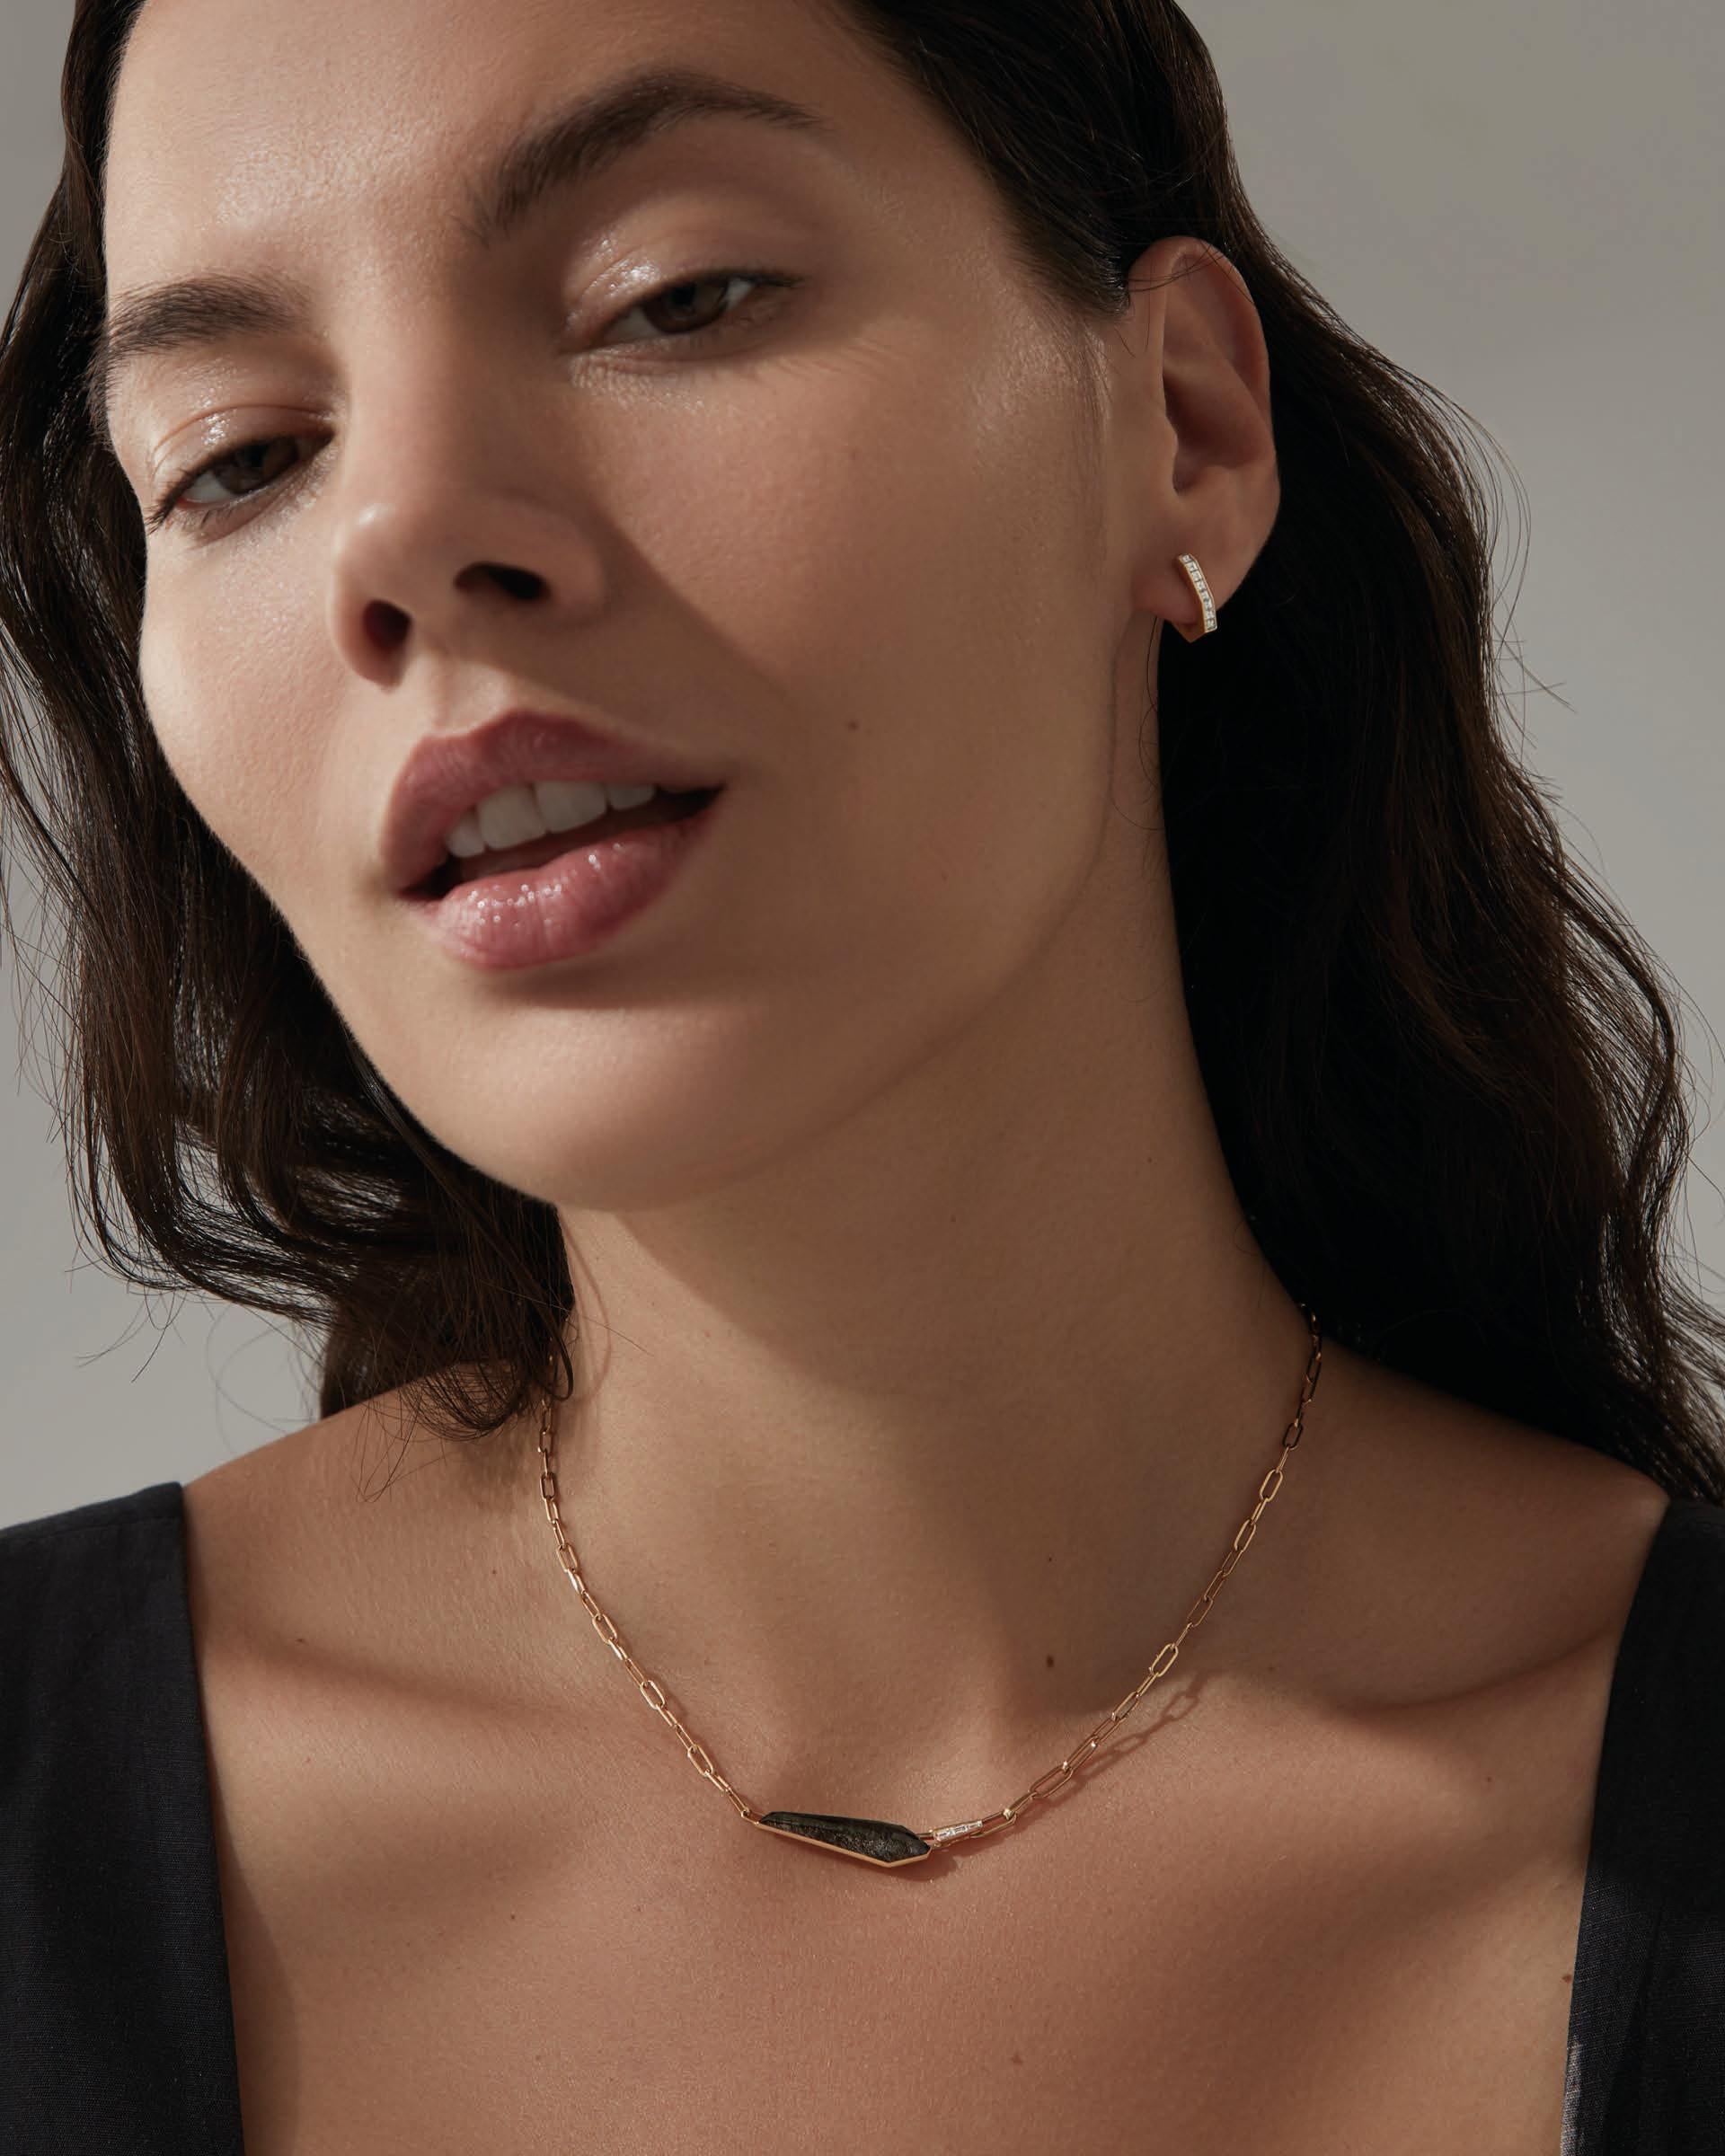 ‘CH2’ celebrates 25 years of the Crystal Haze effect created by Stephen Webster. The pioneering technique of layering faceted Quartz with a wide variety of vibrant gemstones brings a modern and new colour palette to fine jewellery.

Alluringly